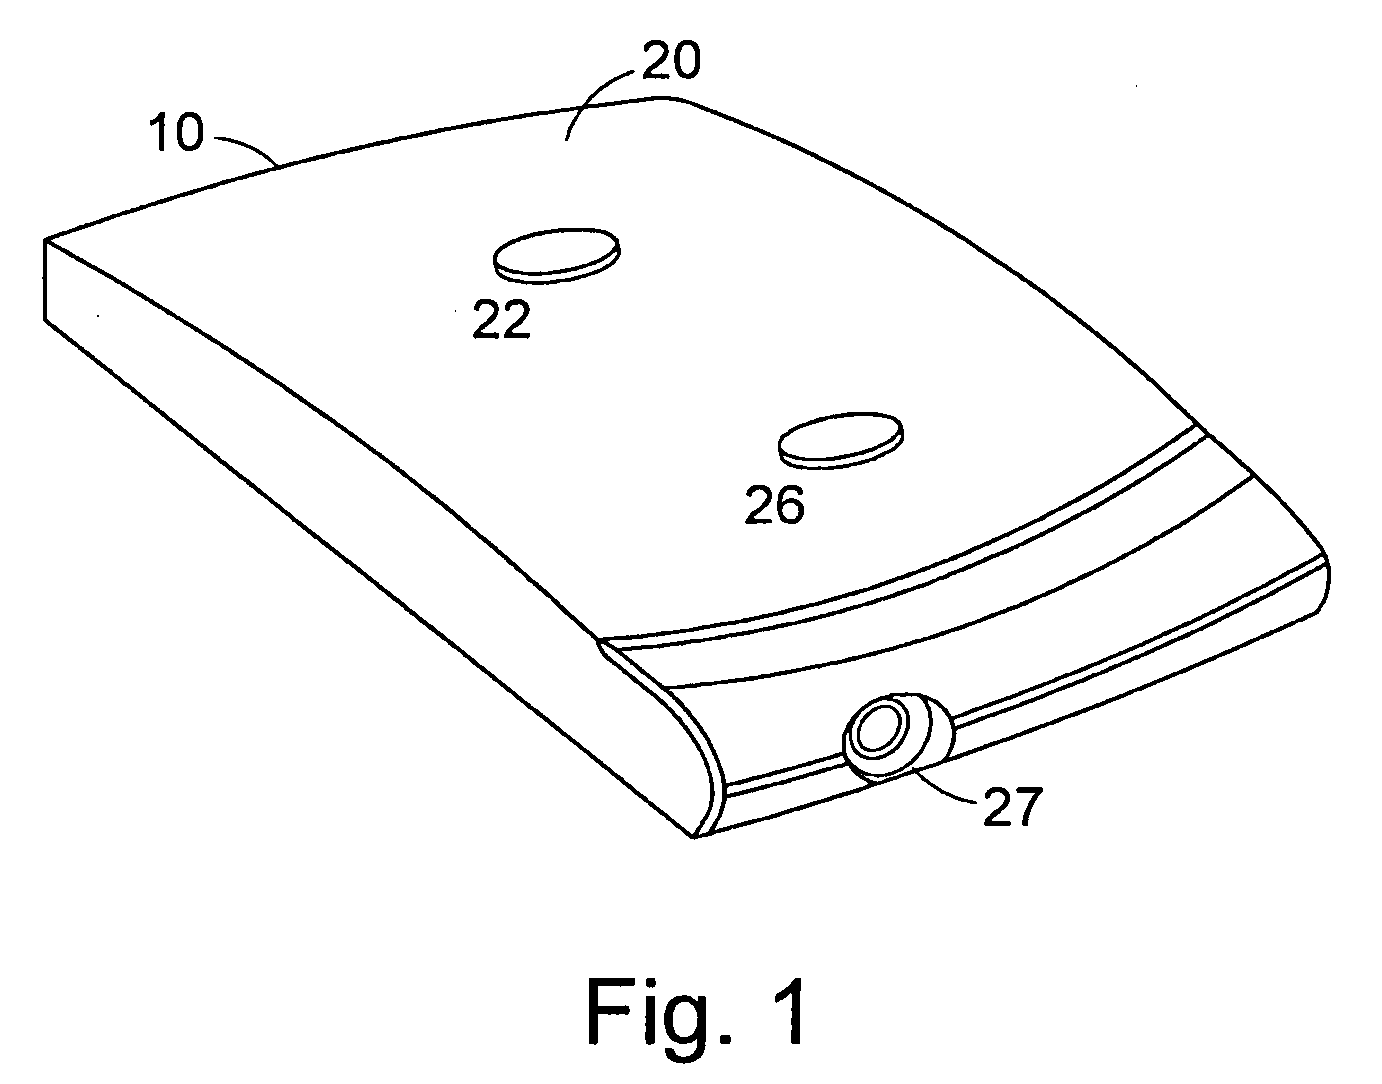 Method and apparatus for treating or preventing a medical condition